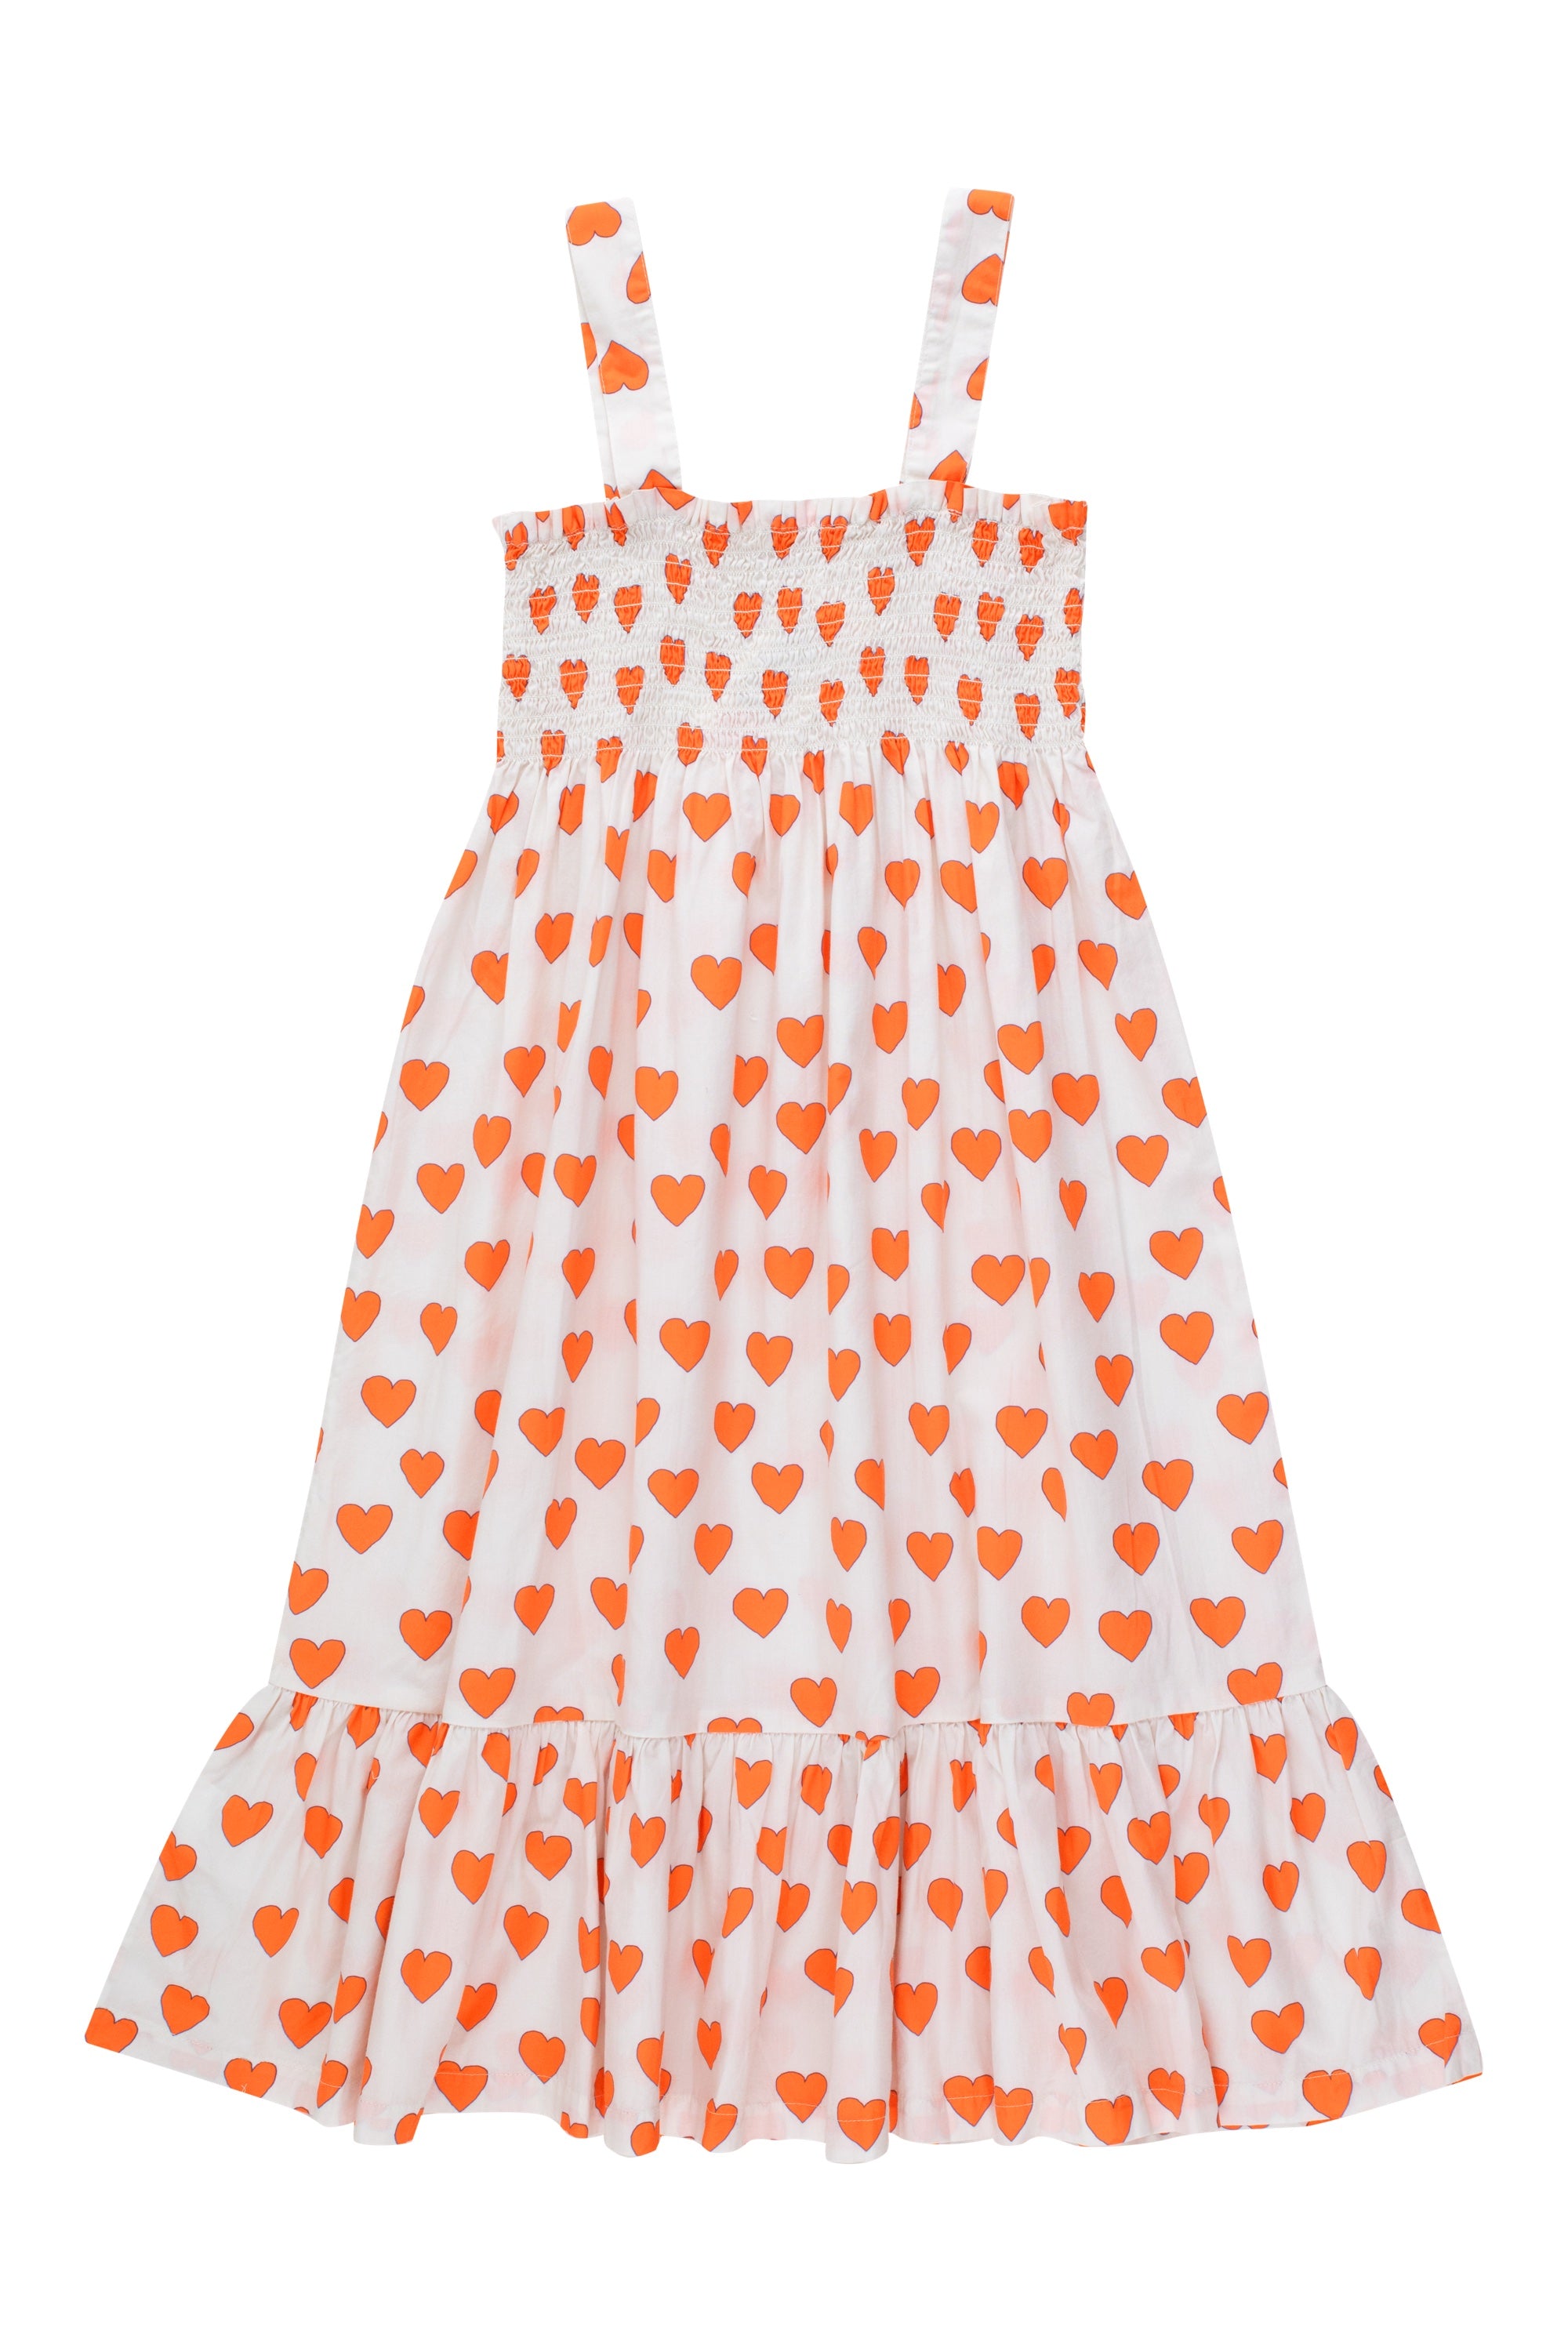 Tiny Cottons Hearts Dress - Off White